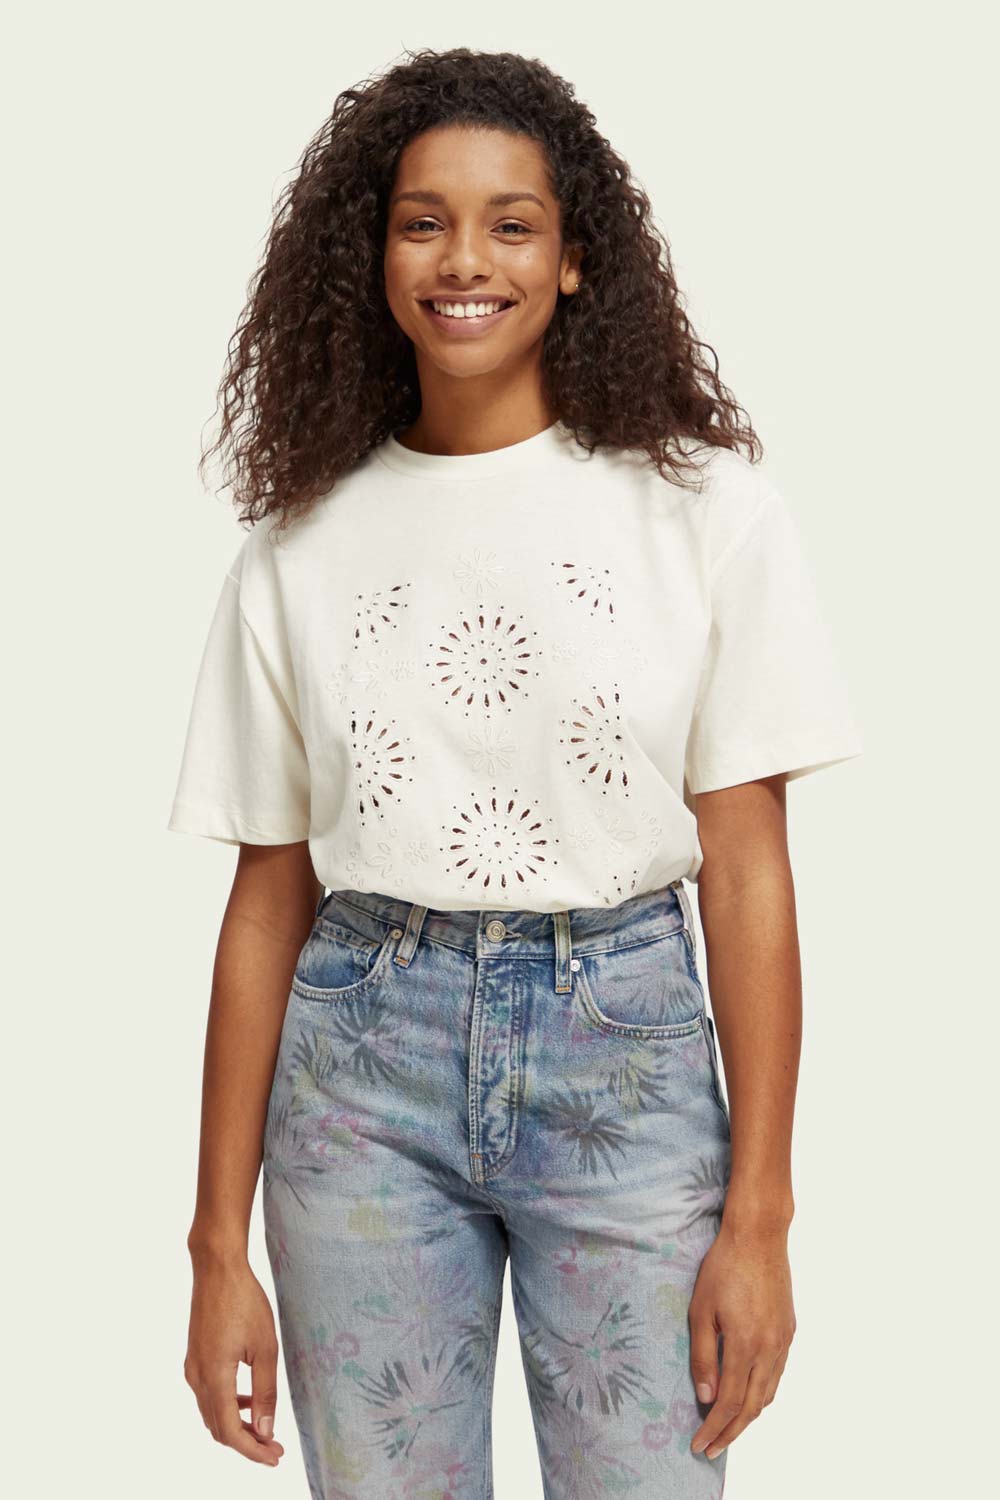 Scotch & Soda - Embroidered Loose Fit Tee - Vanilla White